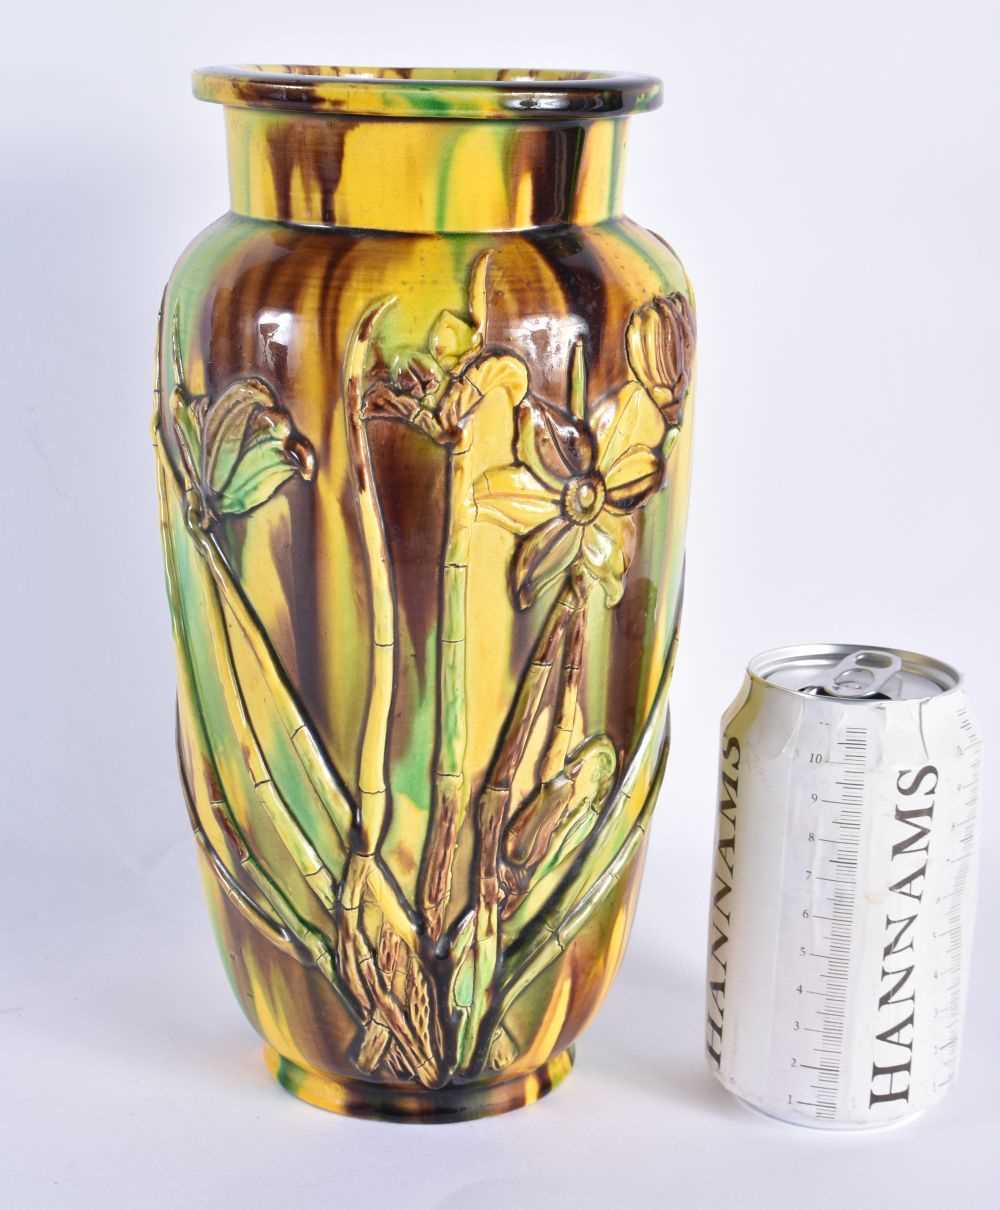 A RARE ANTIQUE SPINACH AND EGG GLAZED ENGLISH POTTERY VASE Attributed to Christopher Dresser for